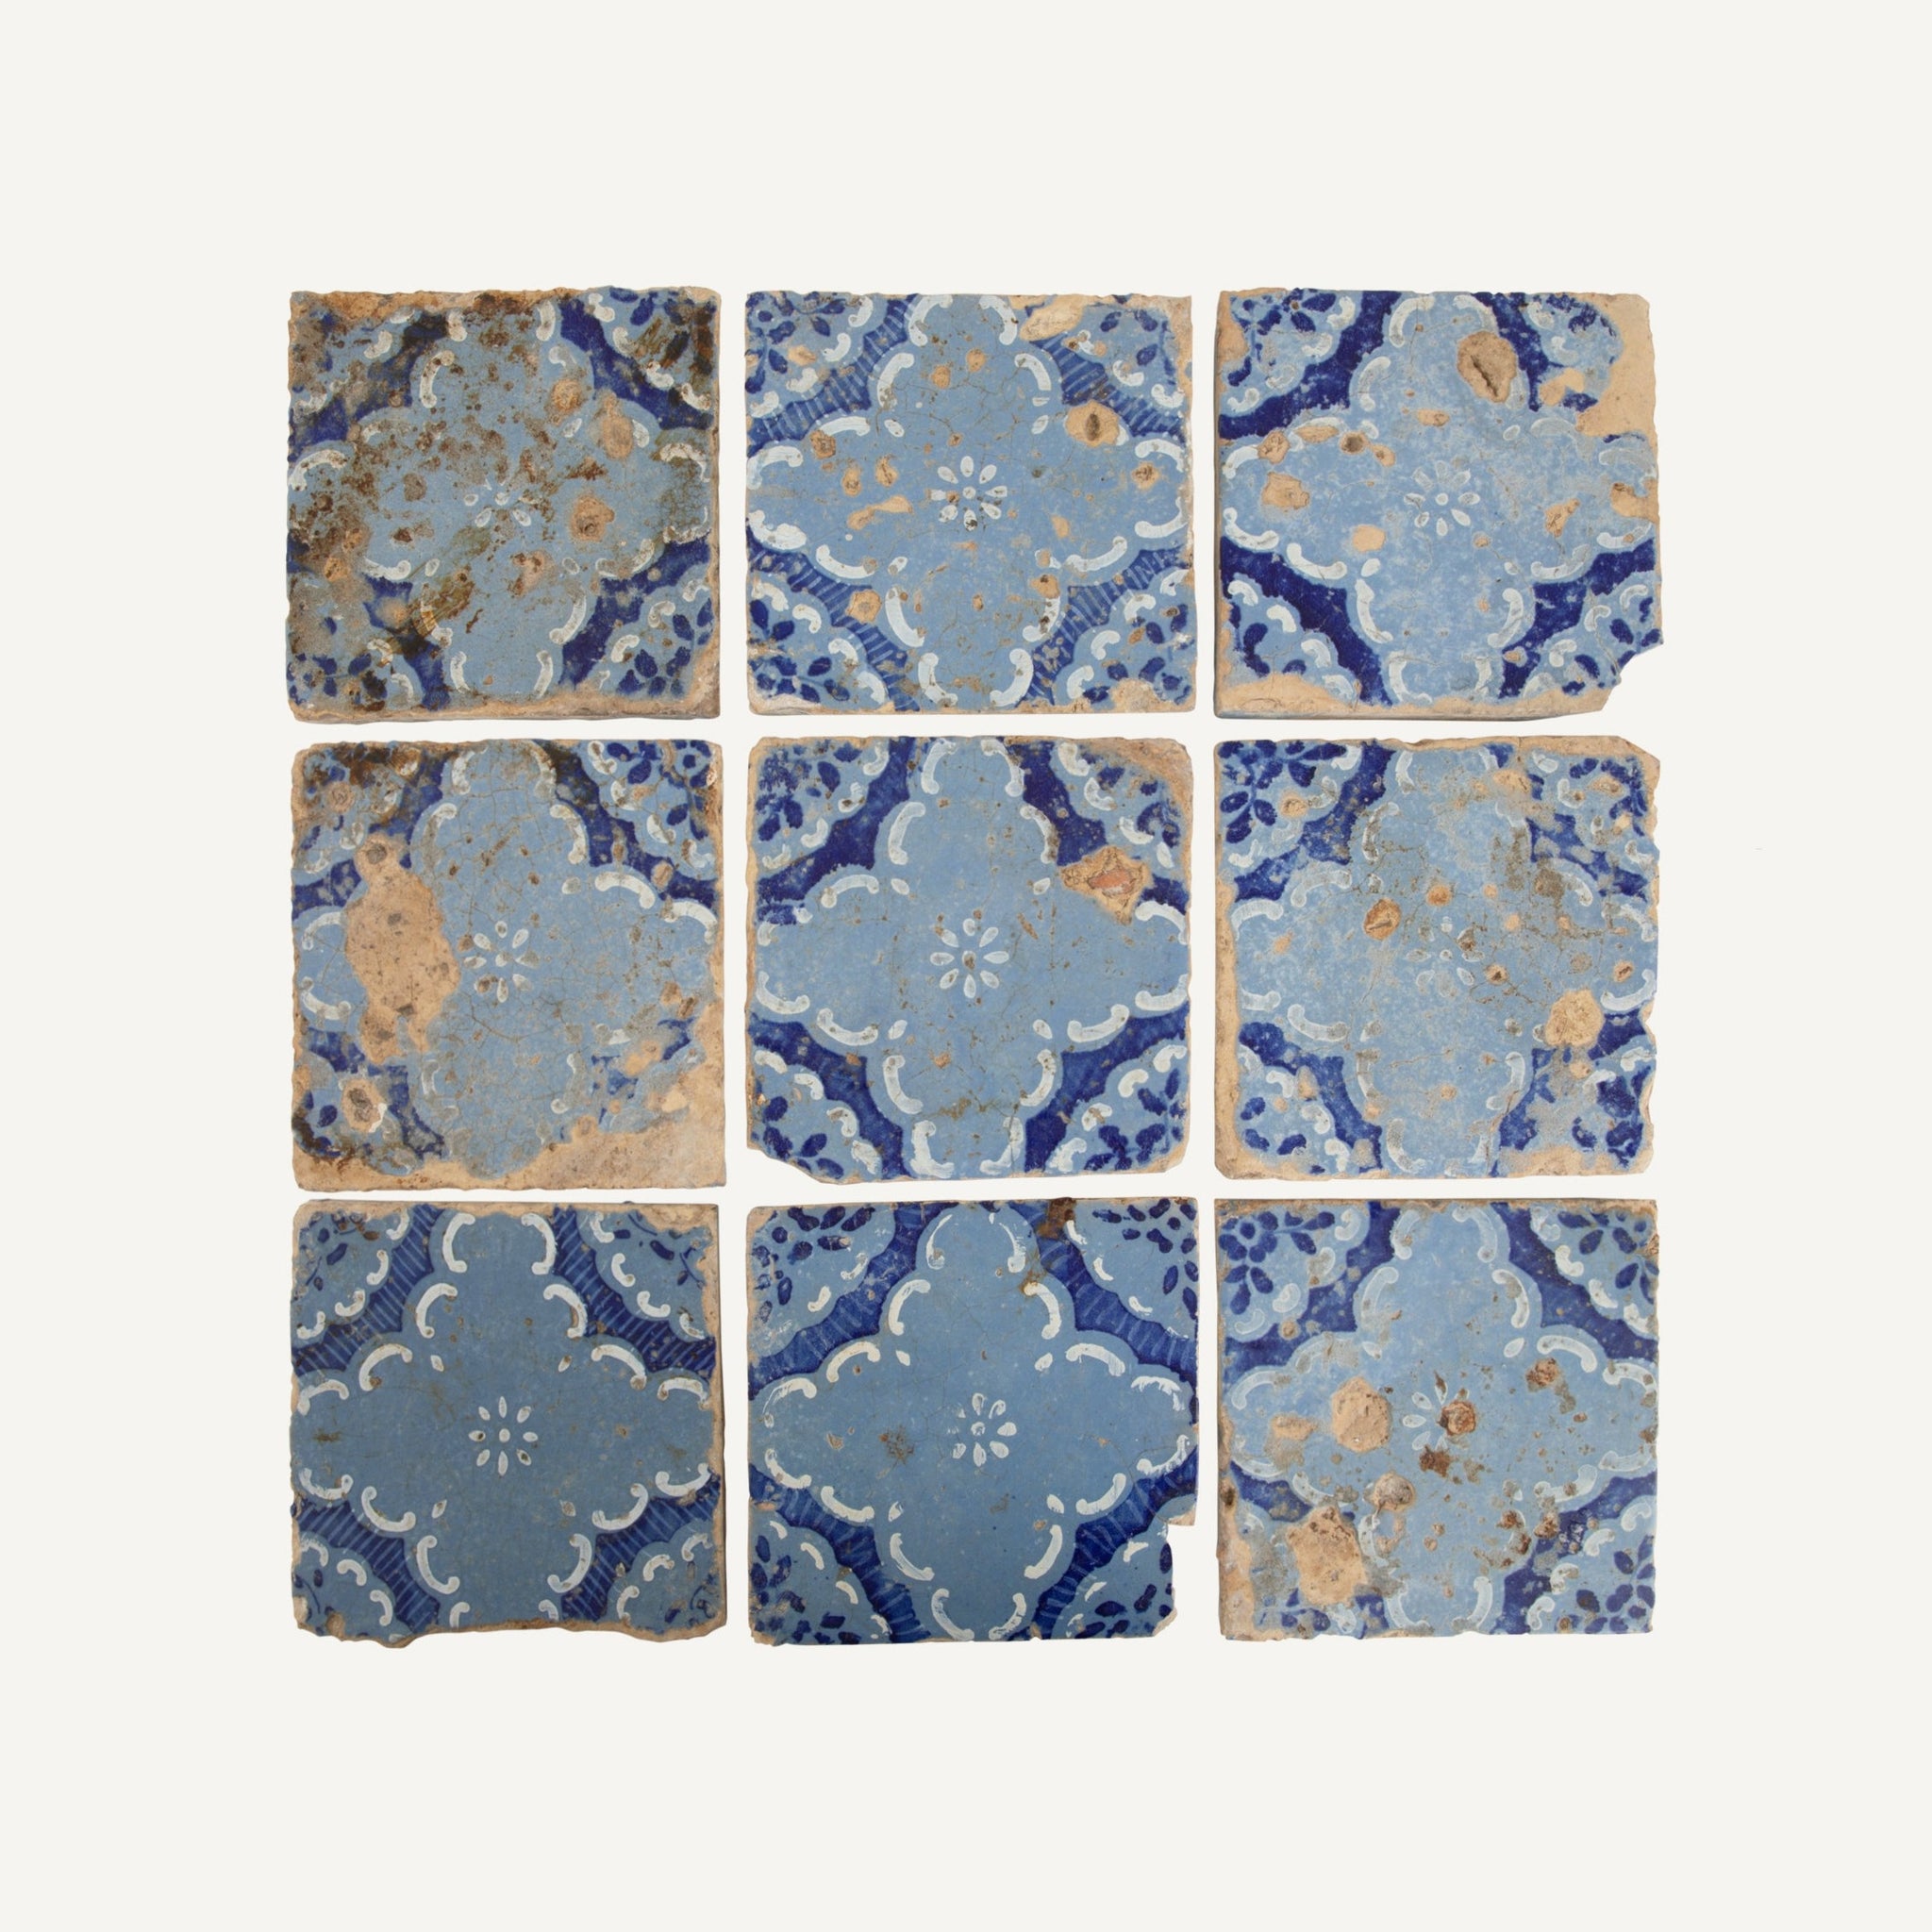 ANTIQUE FRENCH TILES